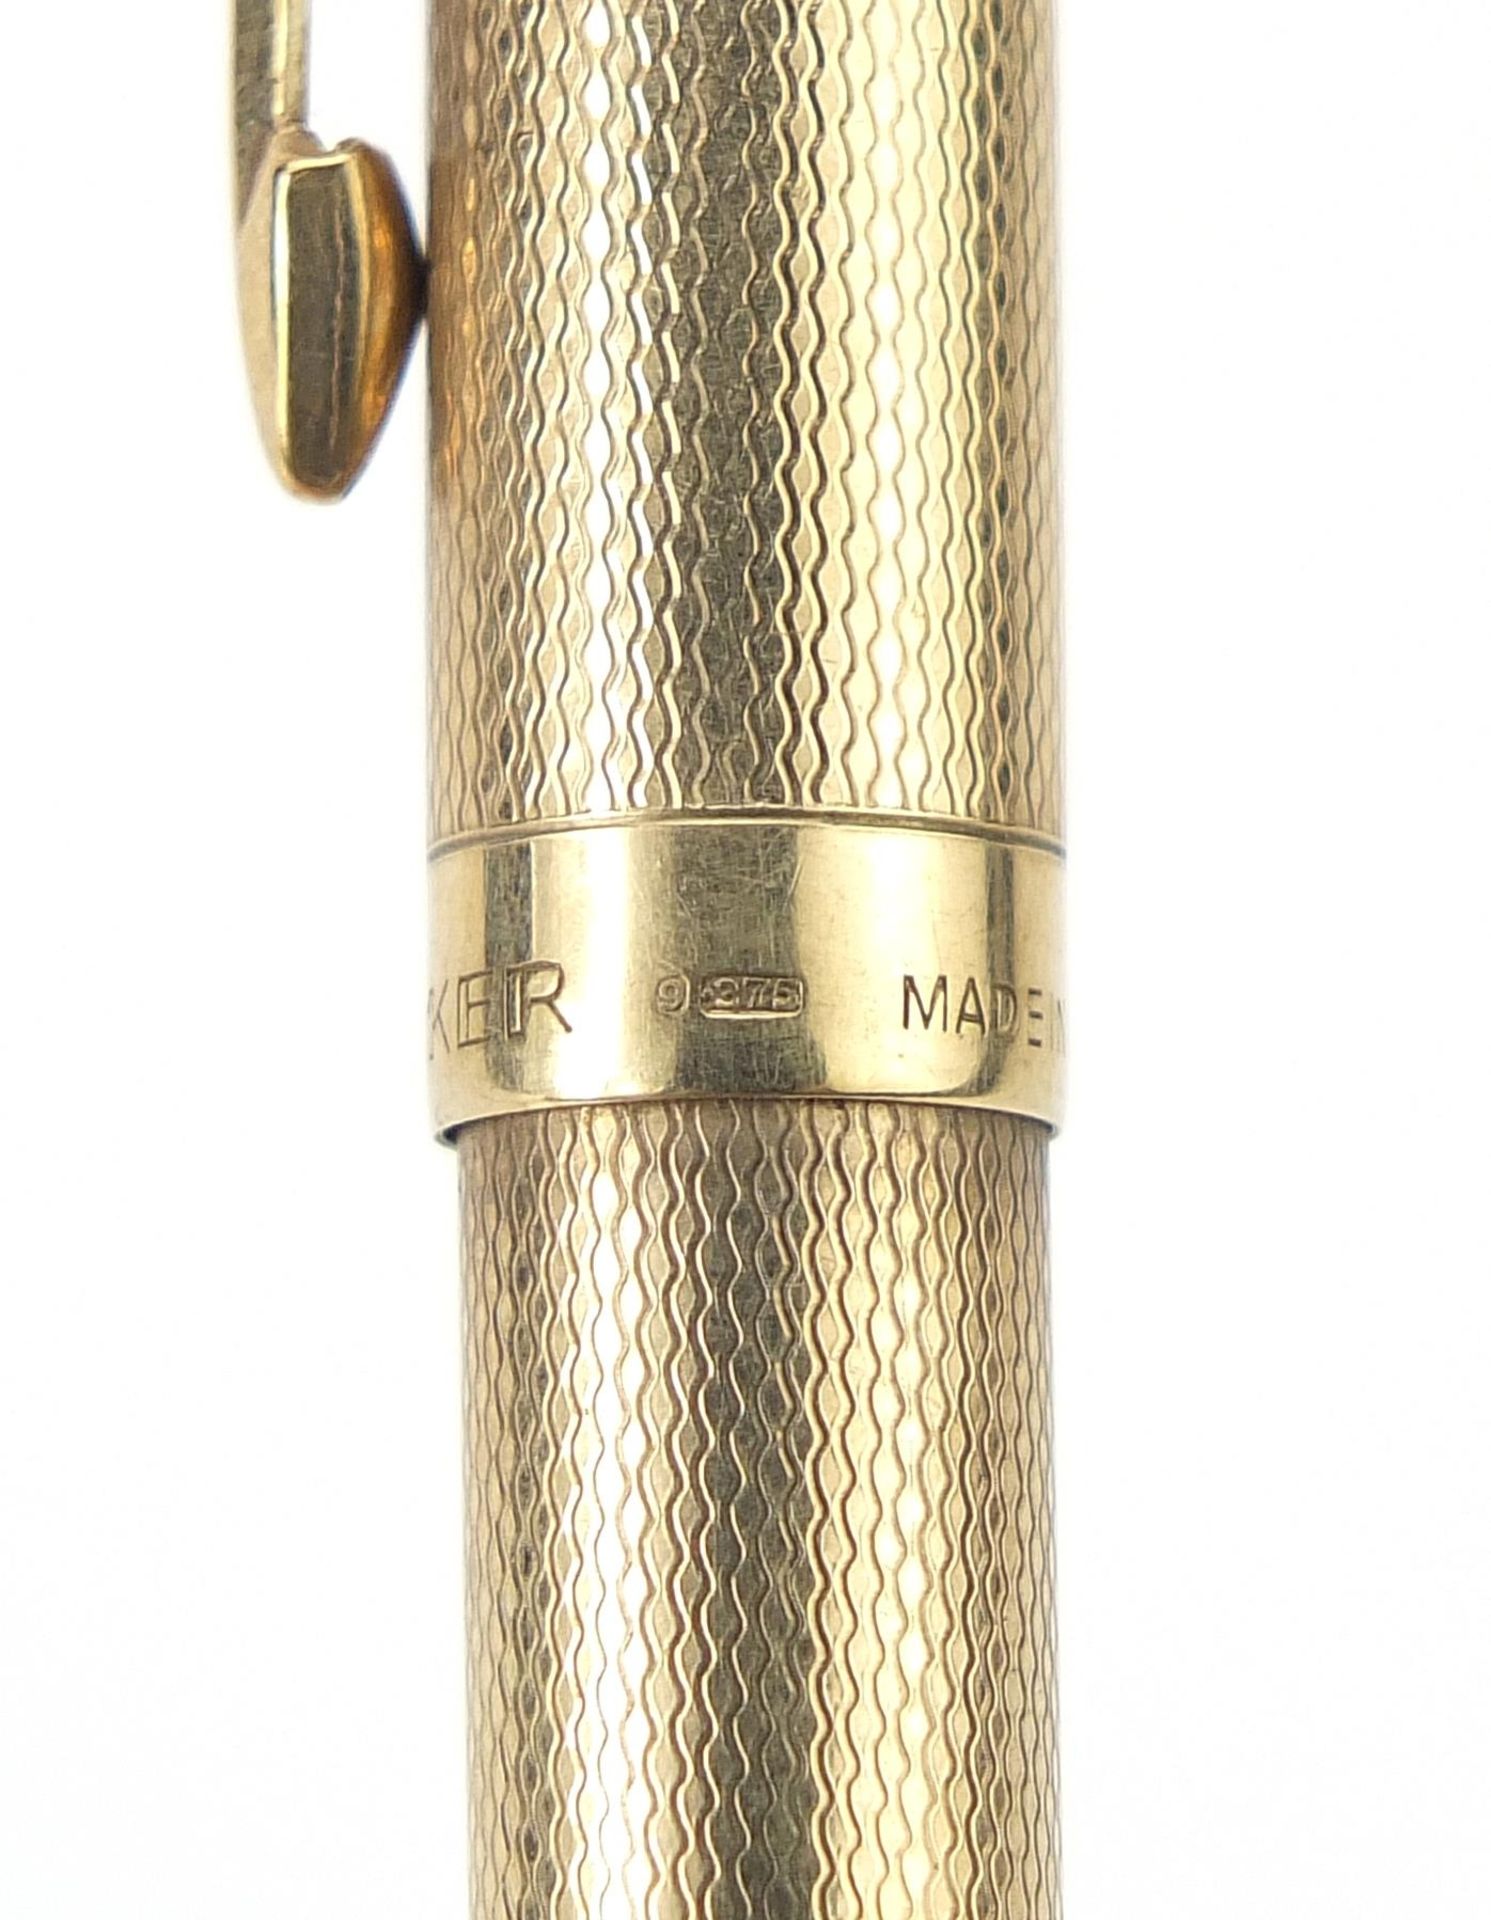 Parker, 9ct gold cased Biro pen with engine turned body, 12.8cm in length, 18.5g - Image 5 of 5